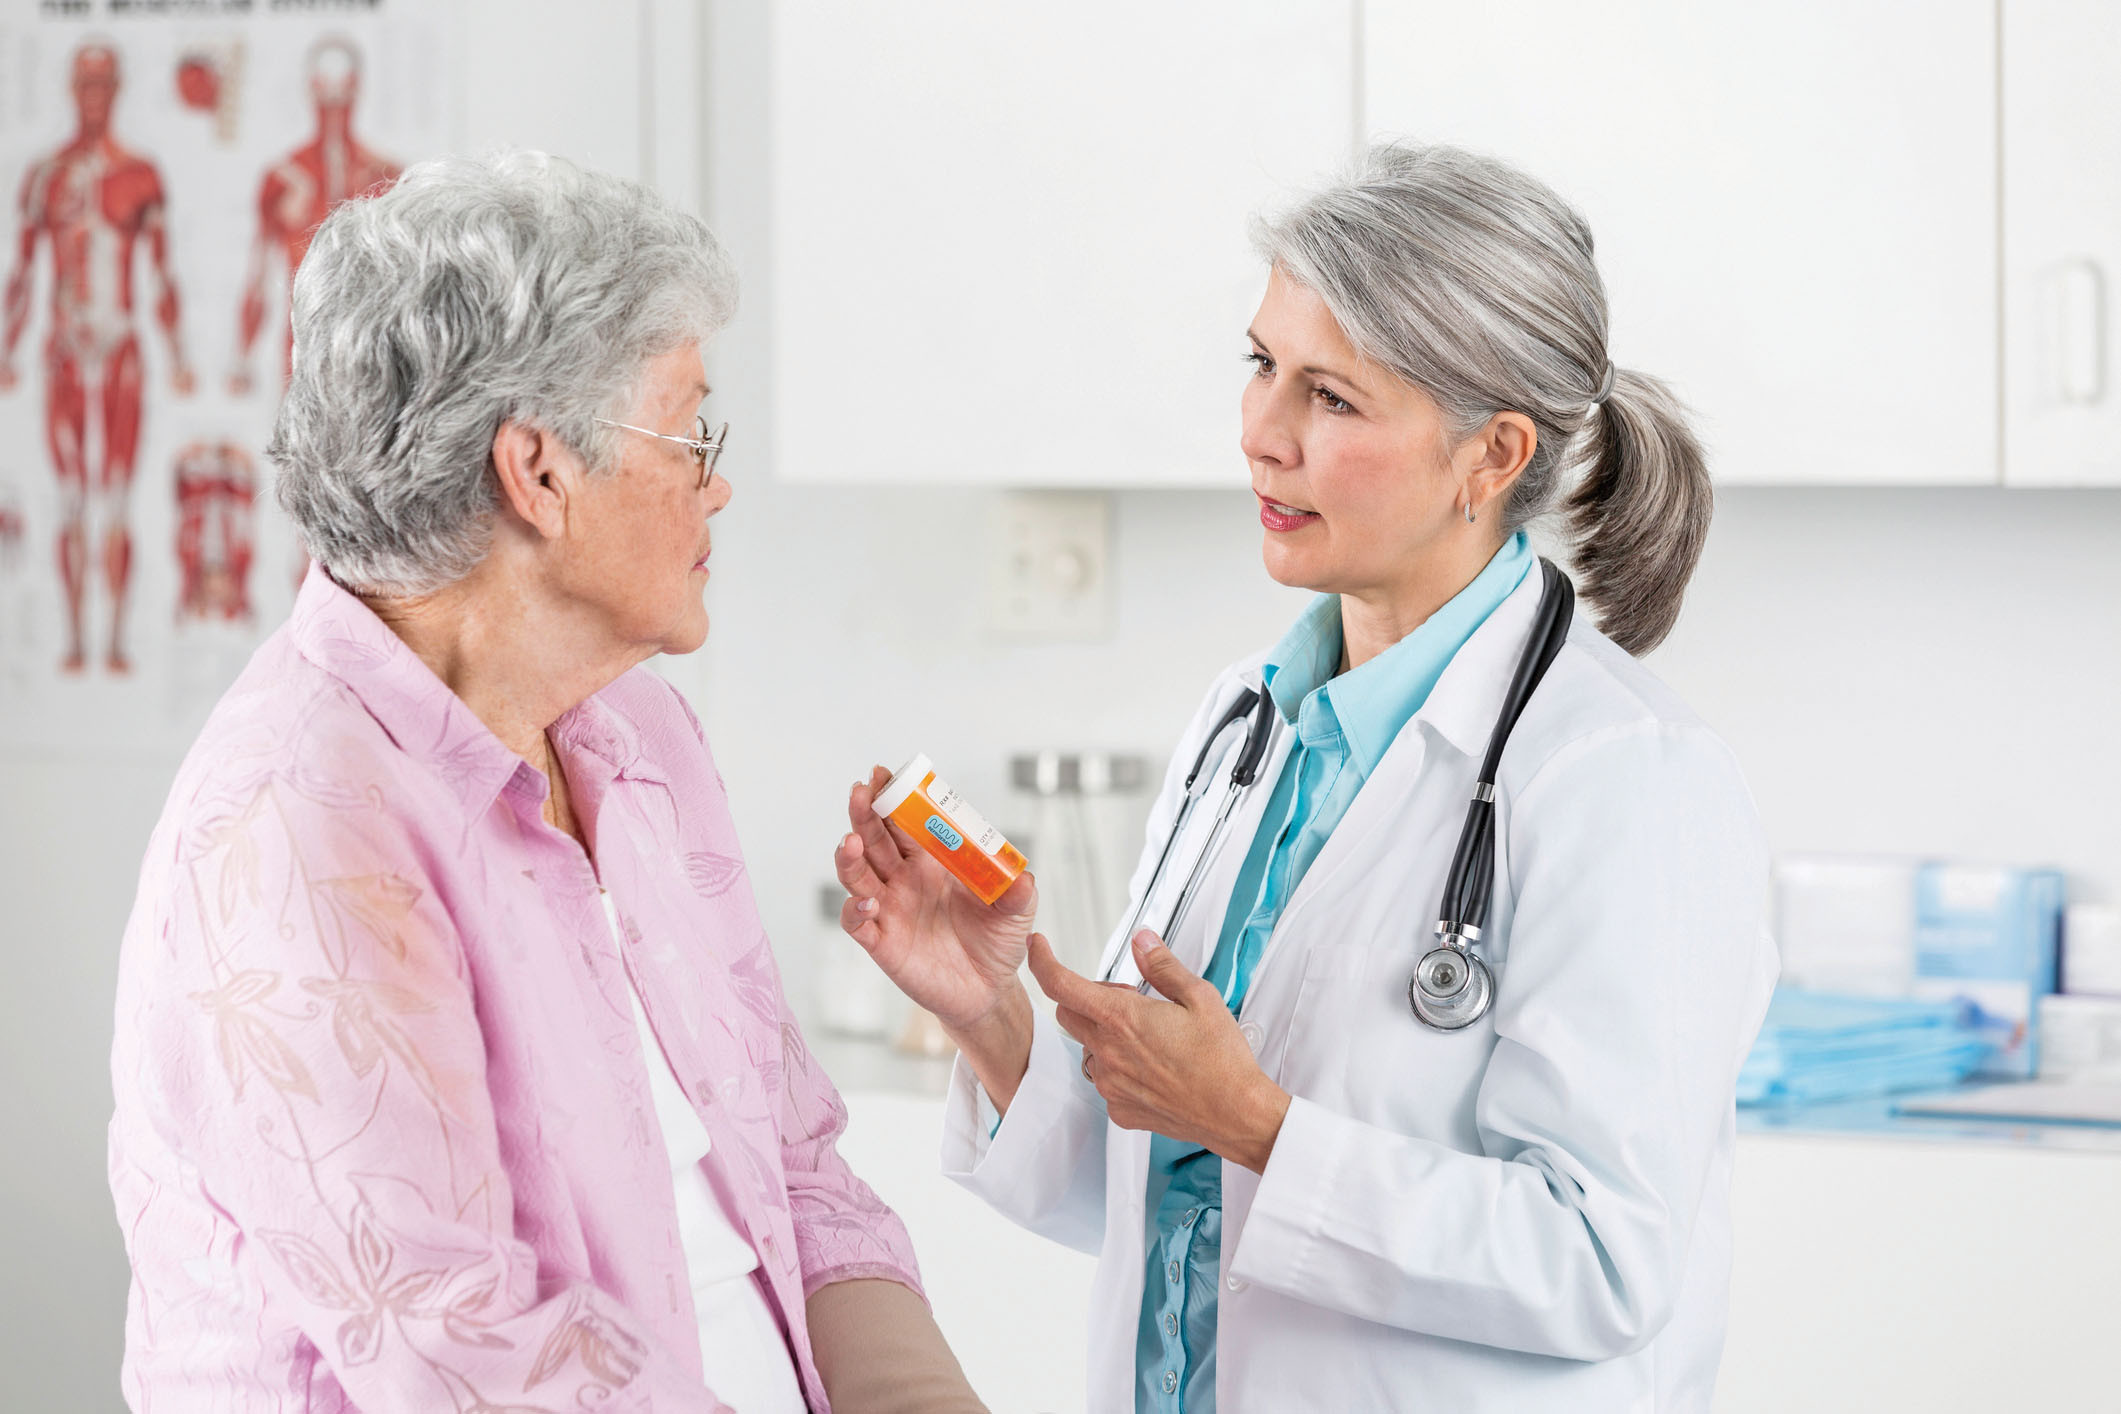 photo of a female doctor speaking with an older female patient in an exam room; doctor is holding a medication bottle